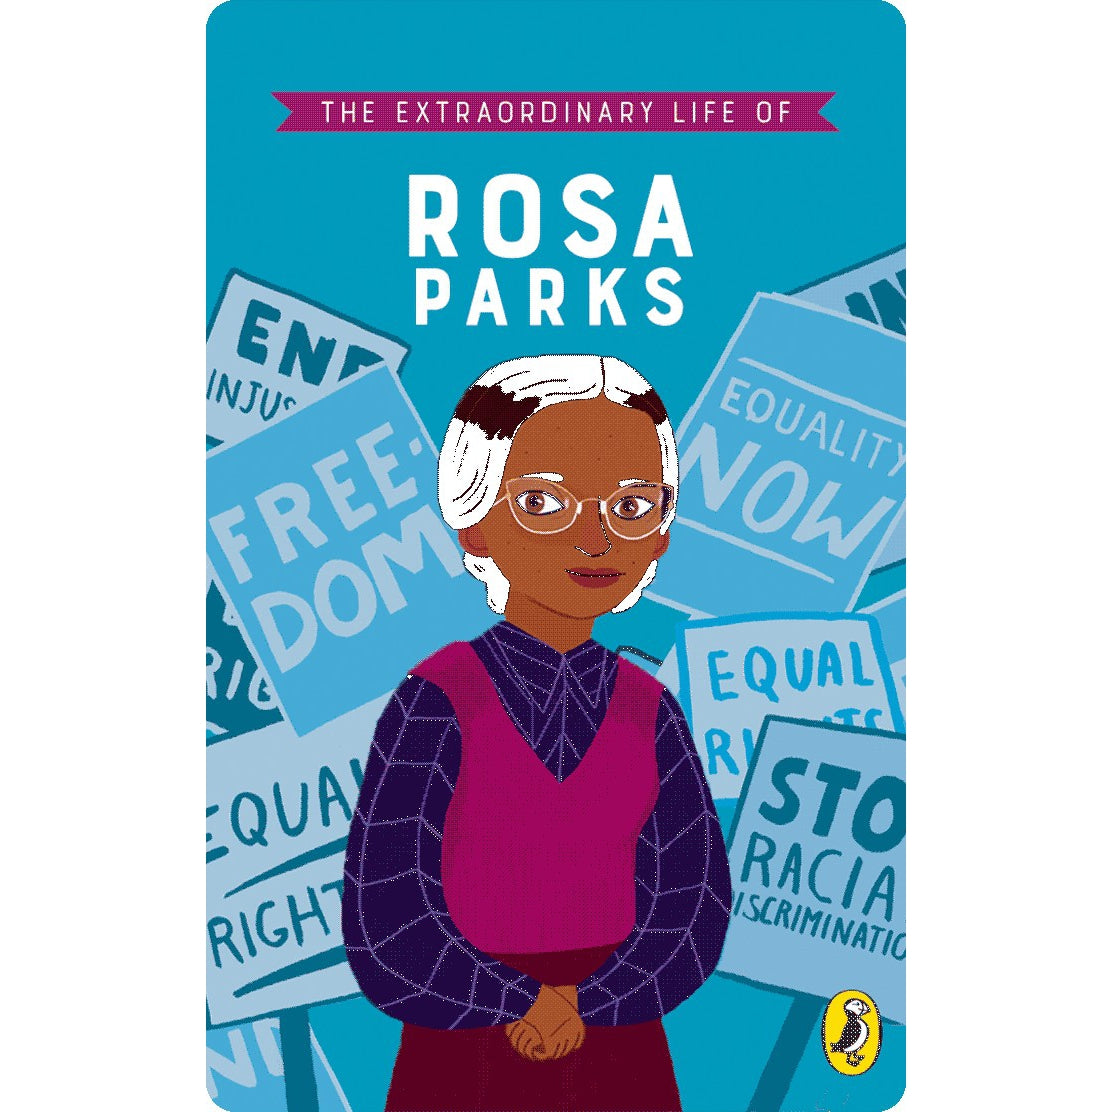 Yoto Card - The Extraordinary Life of Rosa Parks - Child Friendly Audio Story Card for the Yoto Player